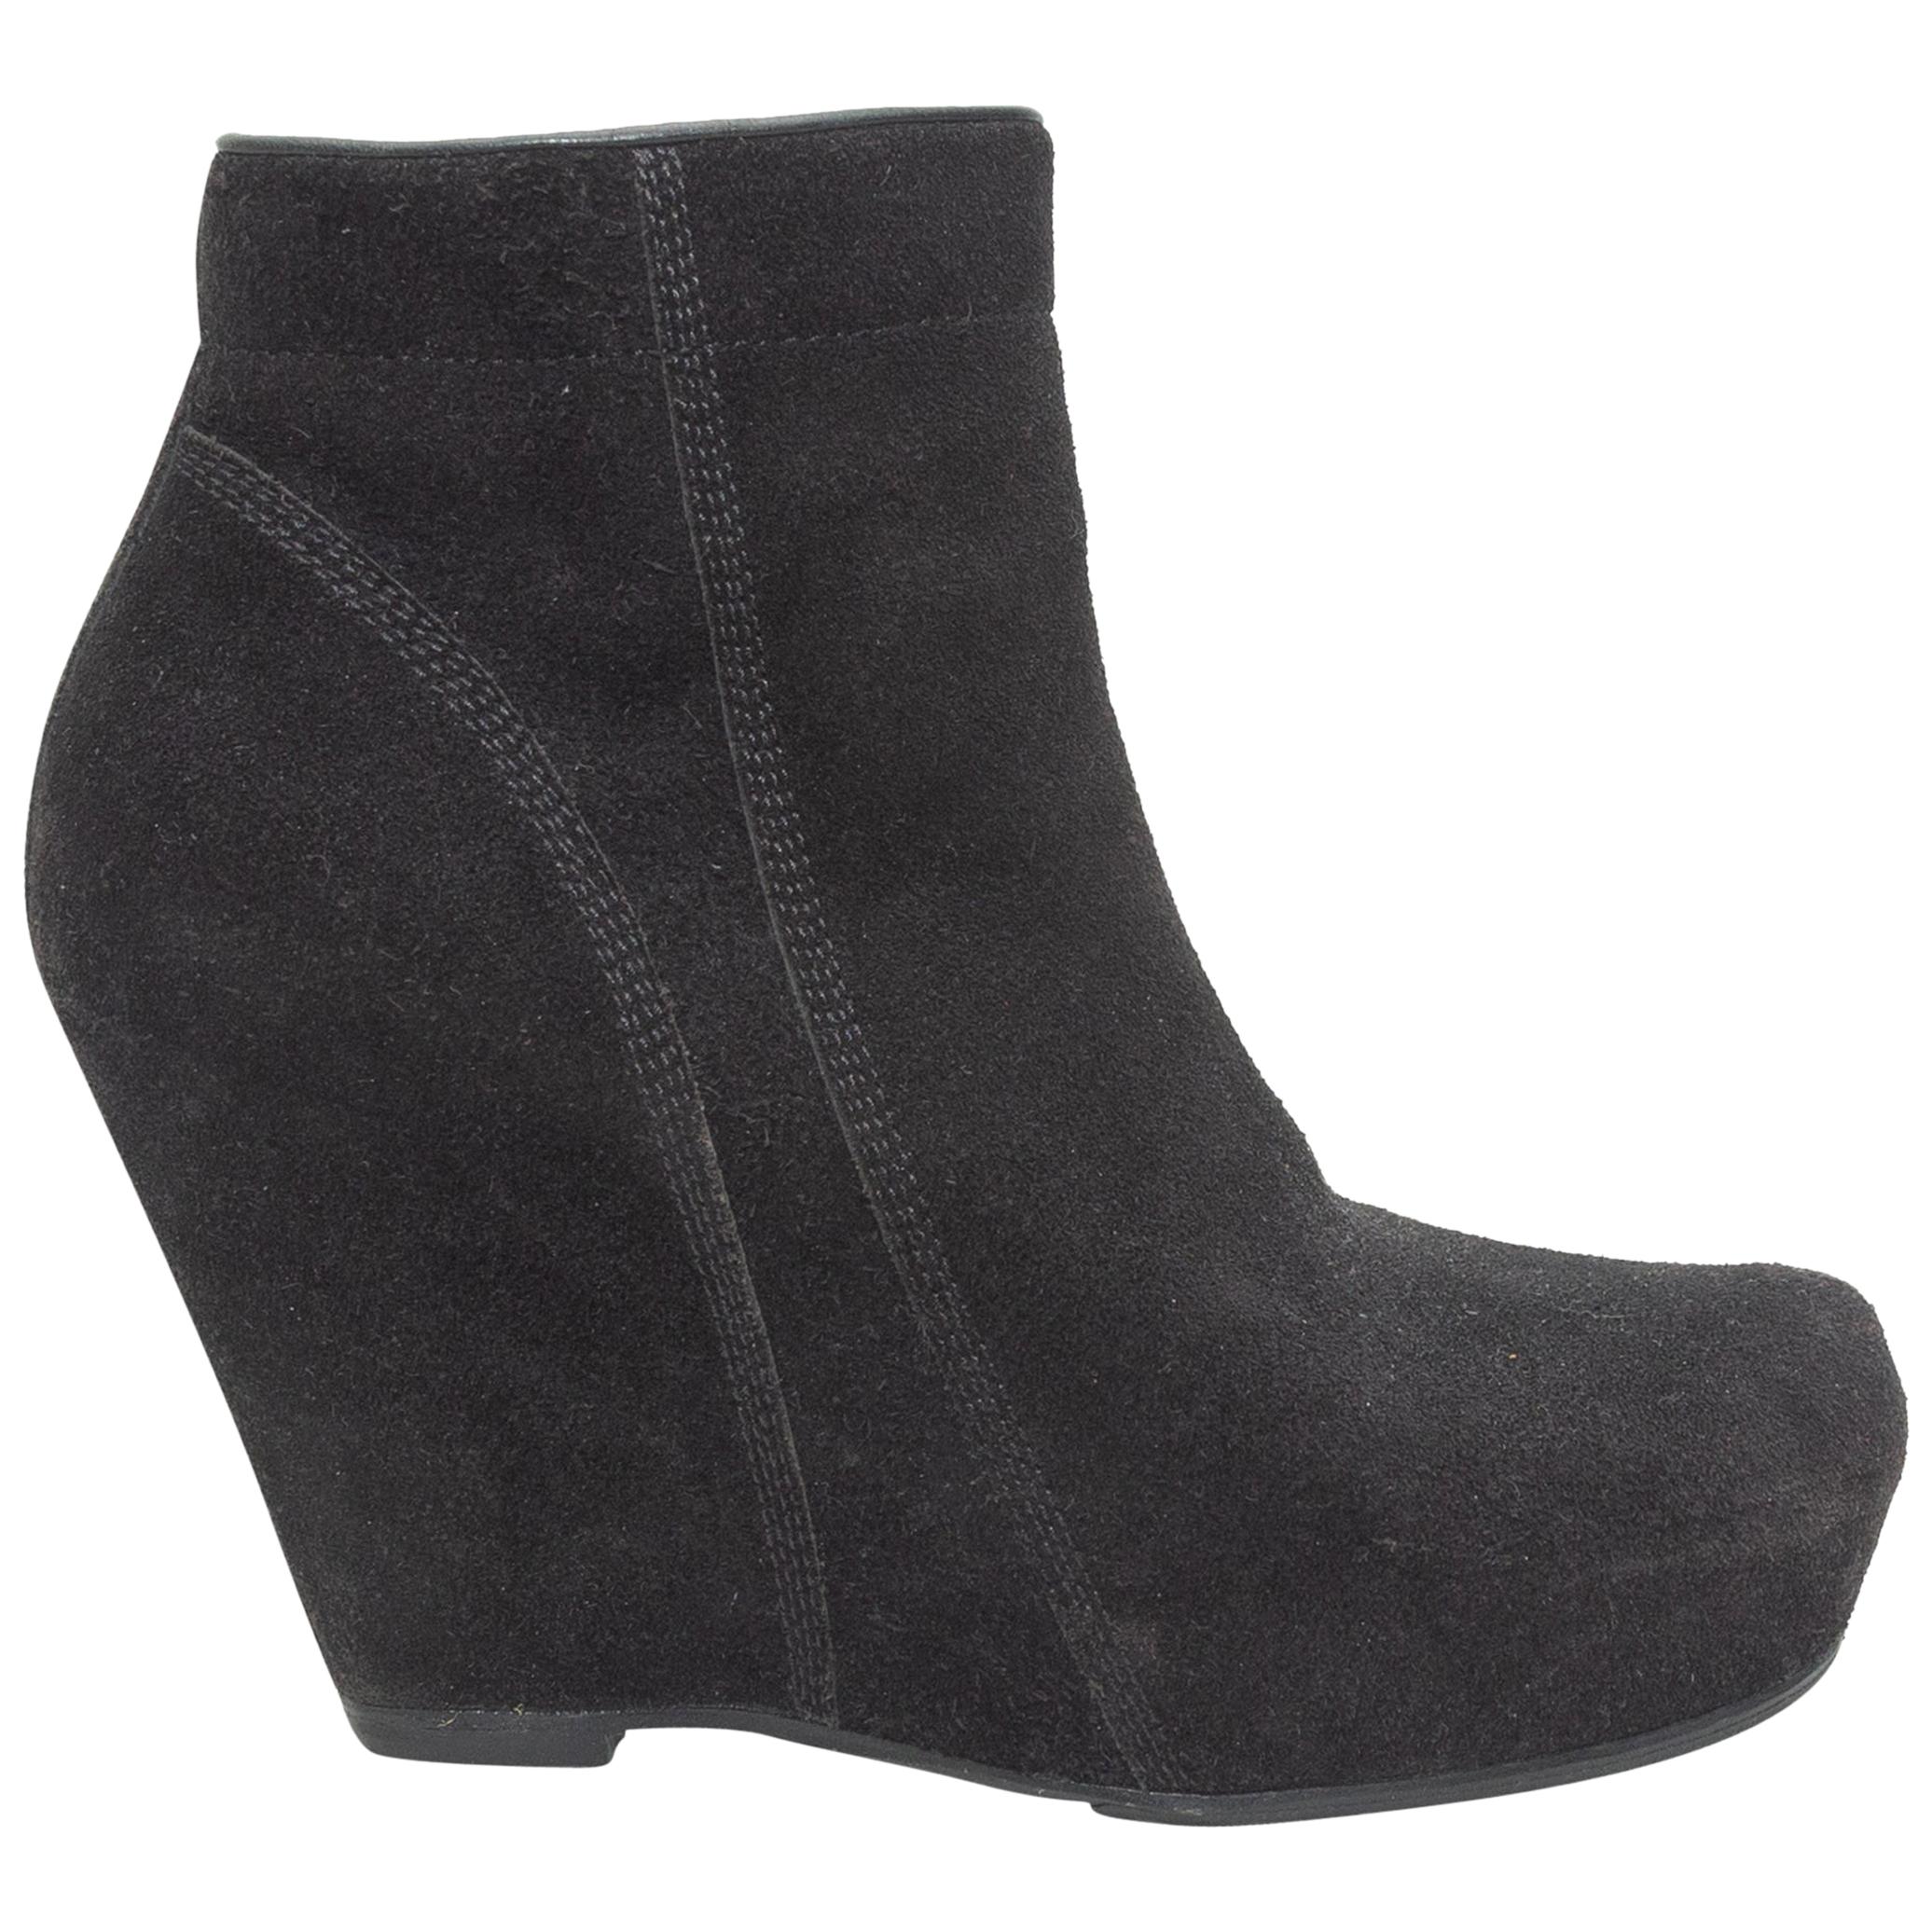 Rick Owens Black Suede Wedge Ankle Boots